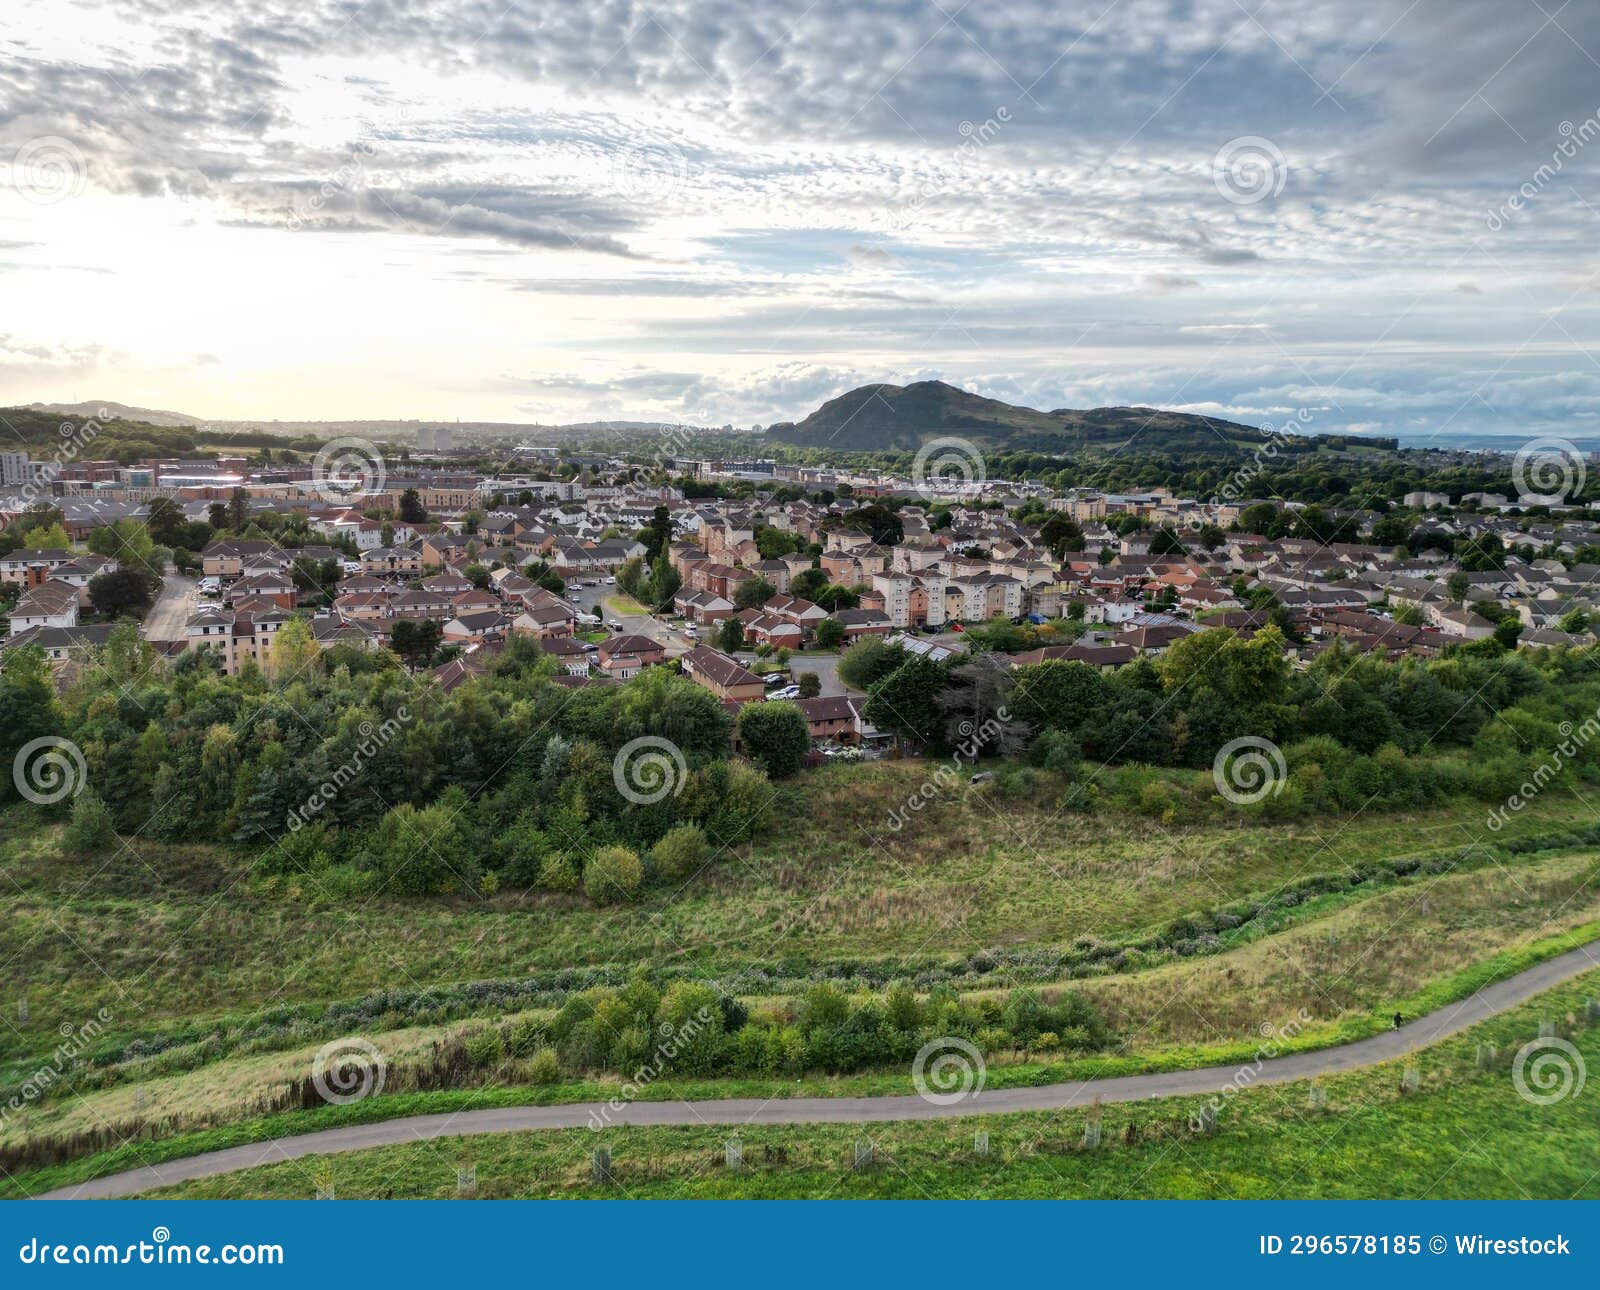 the aerial shot of a town in england, taken from the top of a hill